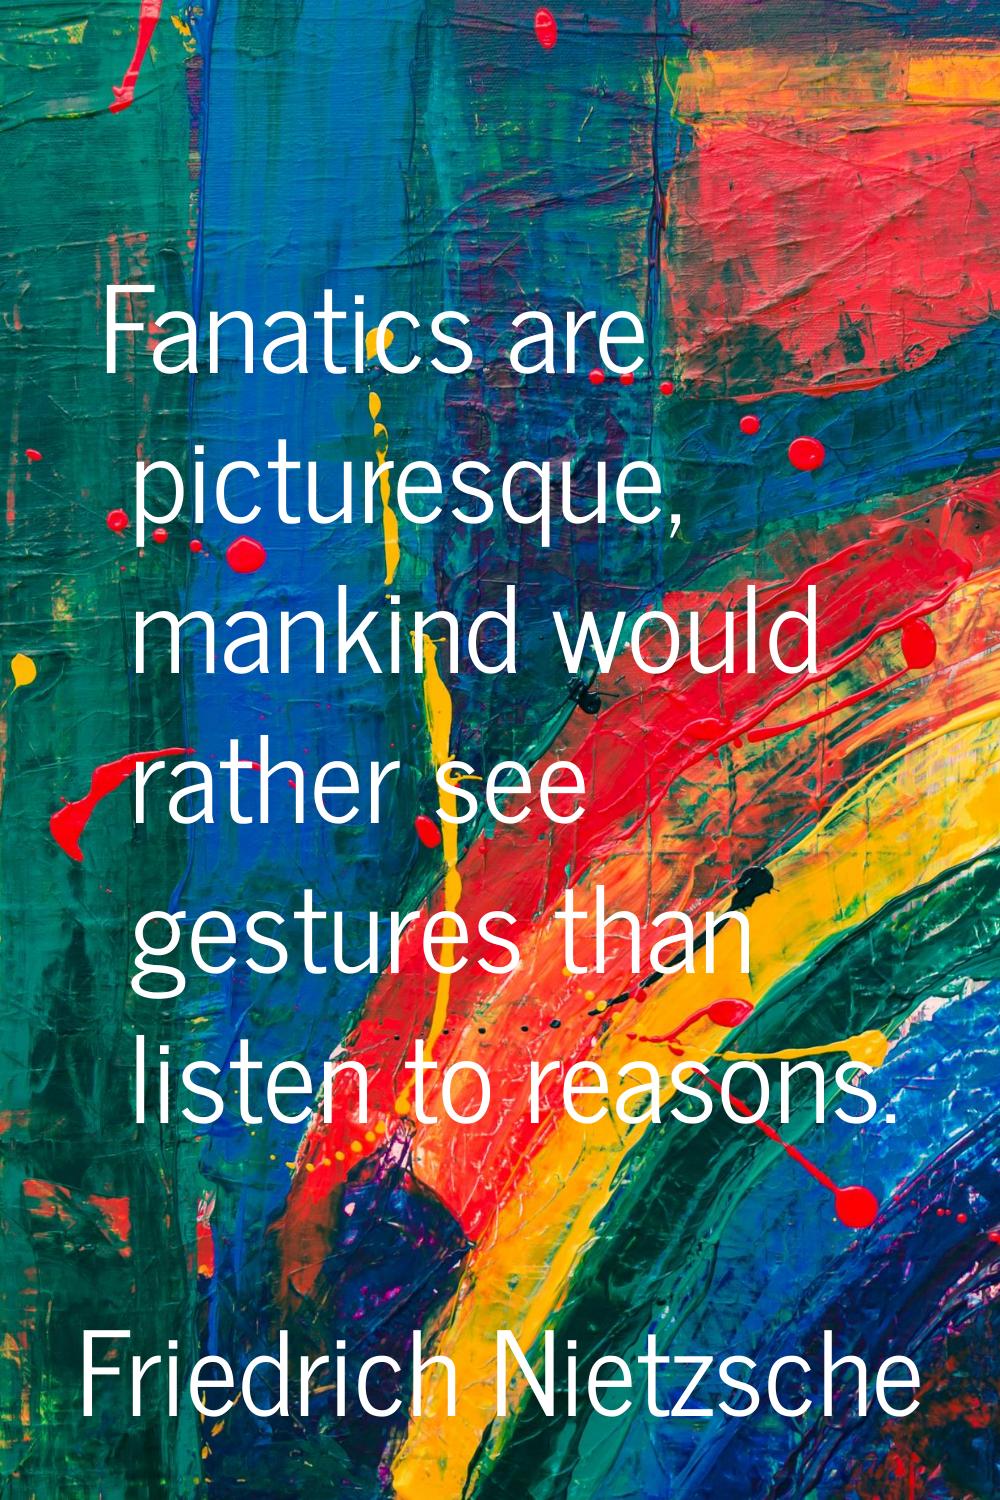 Fanatics are picturesque, mankind would rather see gestures than listen to reasons.